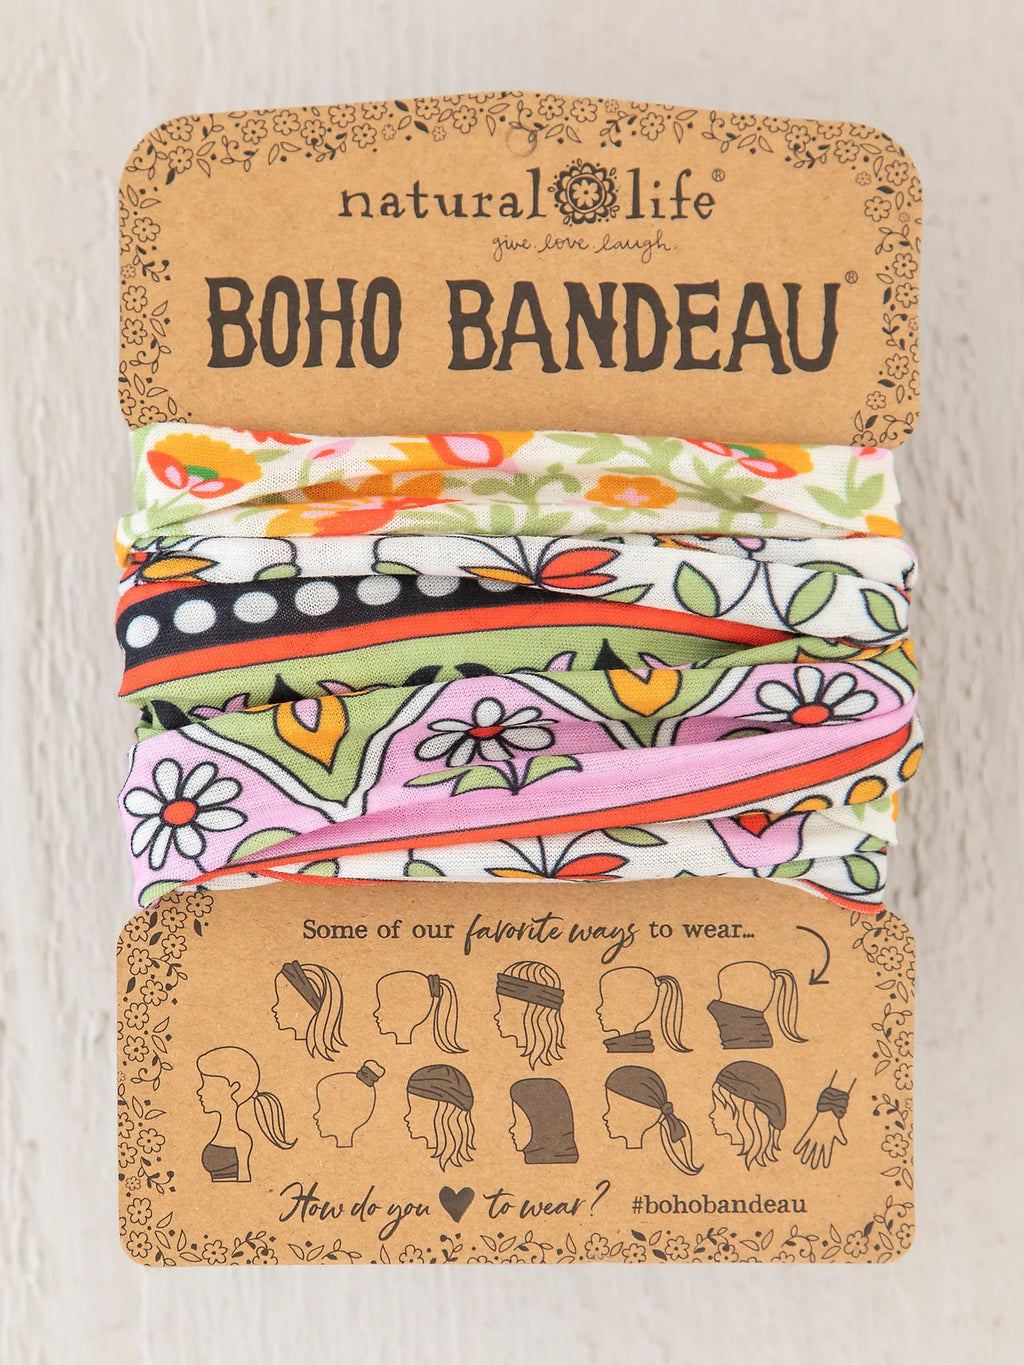 Boho Bandeau in Lilac Orange by Natural Life